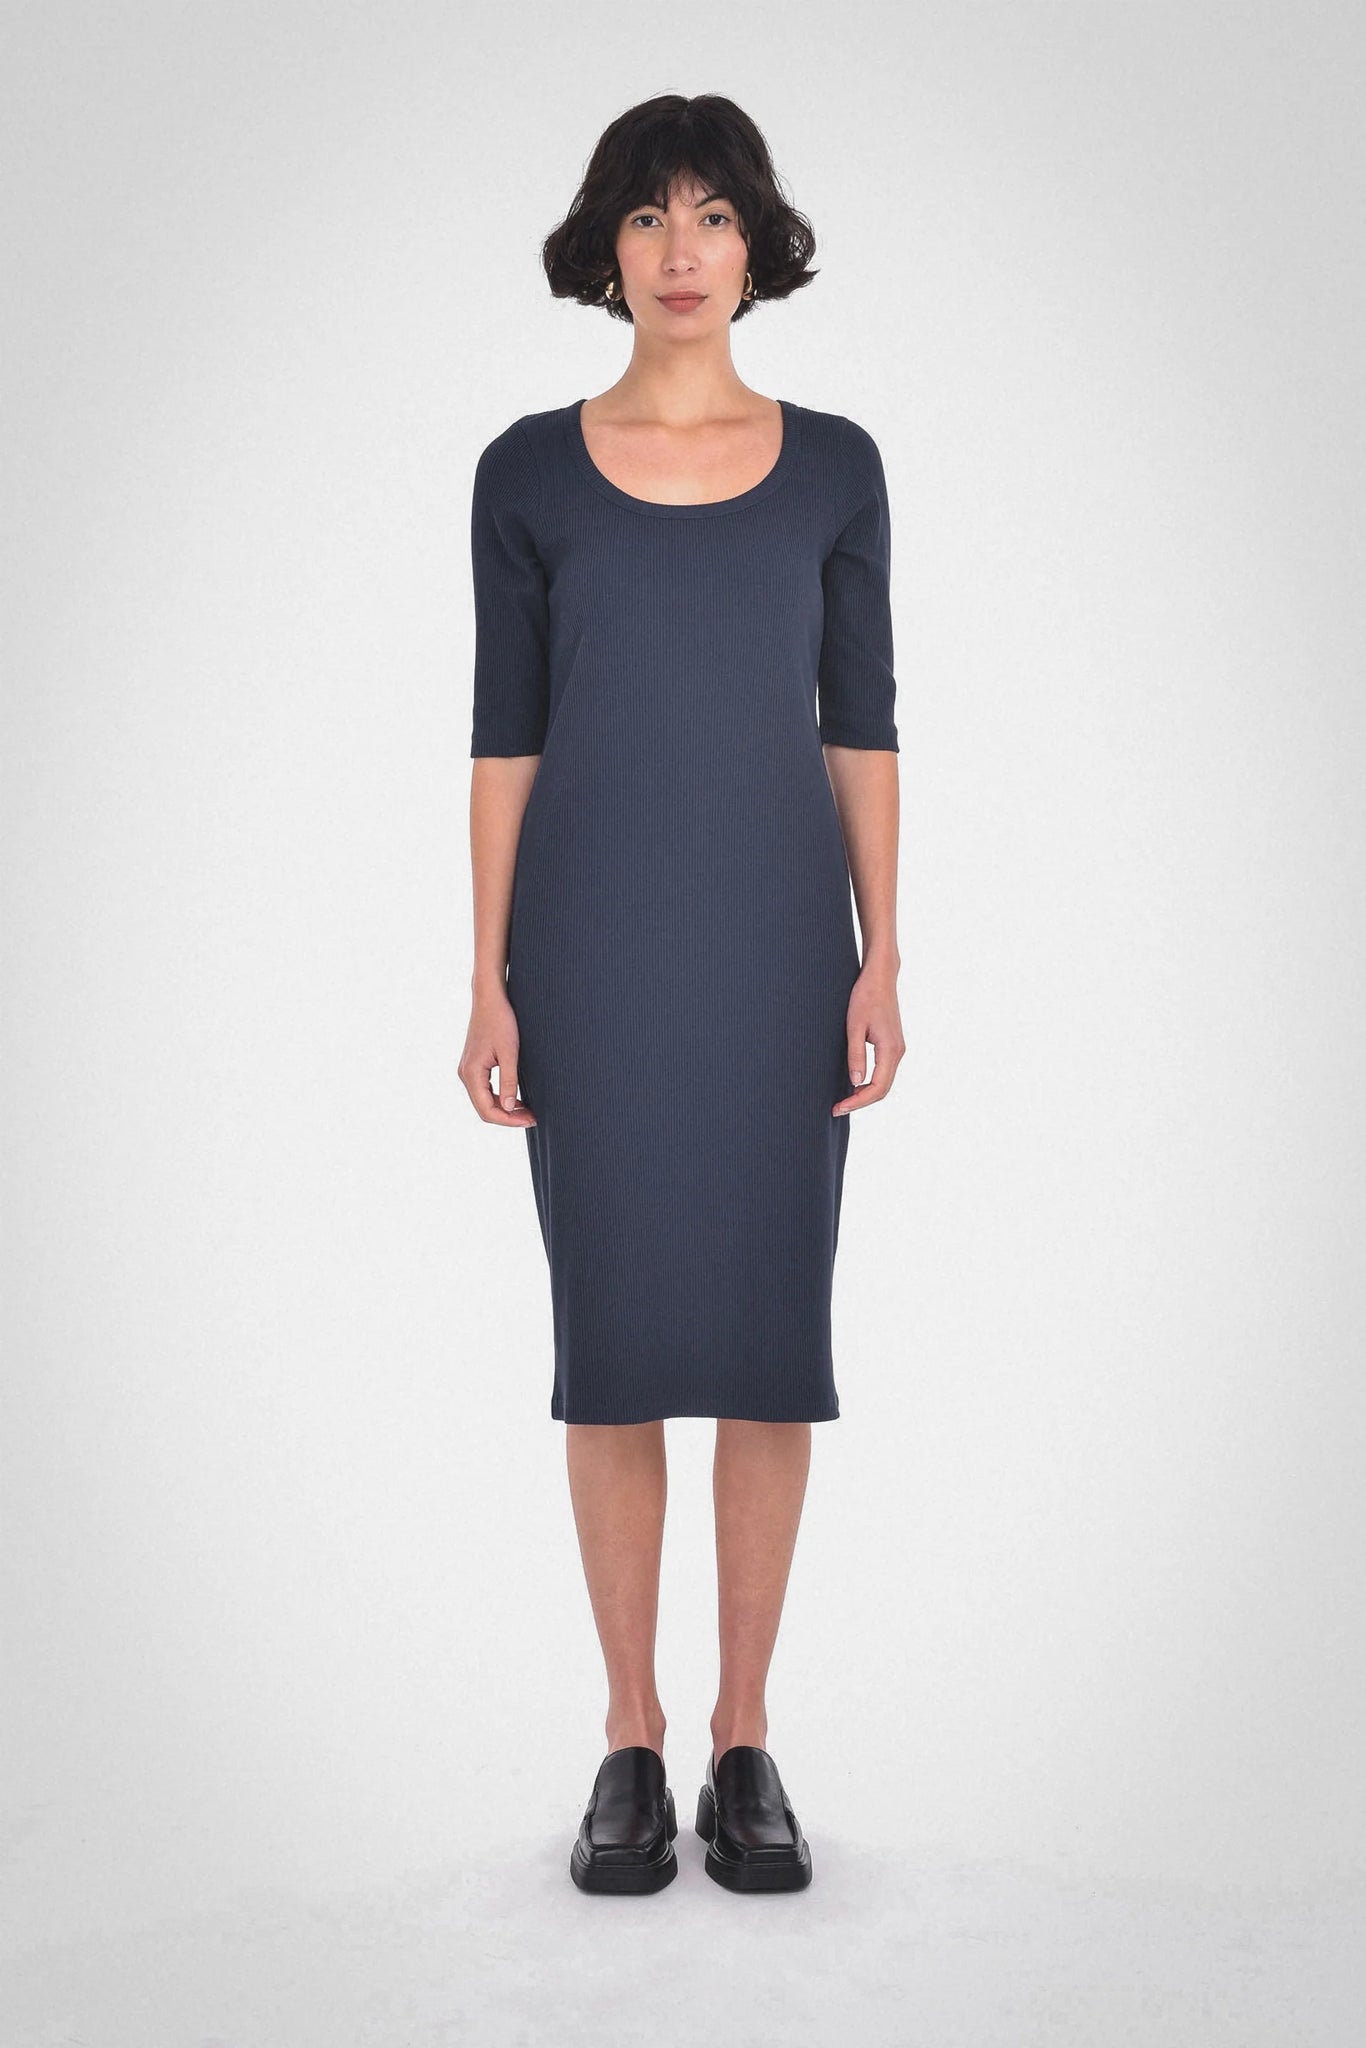 Veronica Dress in Navy From Paper Label available at UniKoncept in Waterloo front view